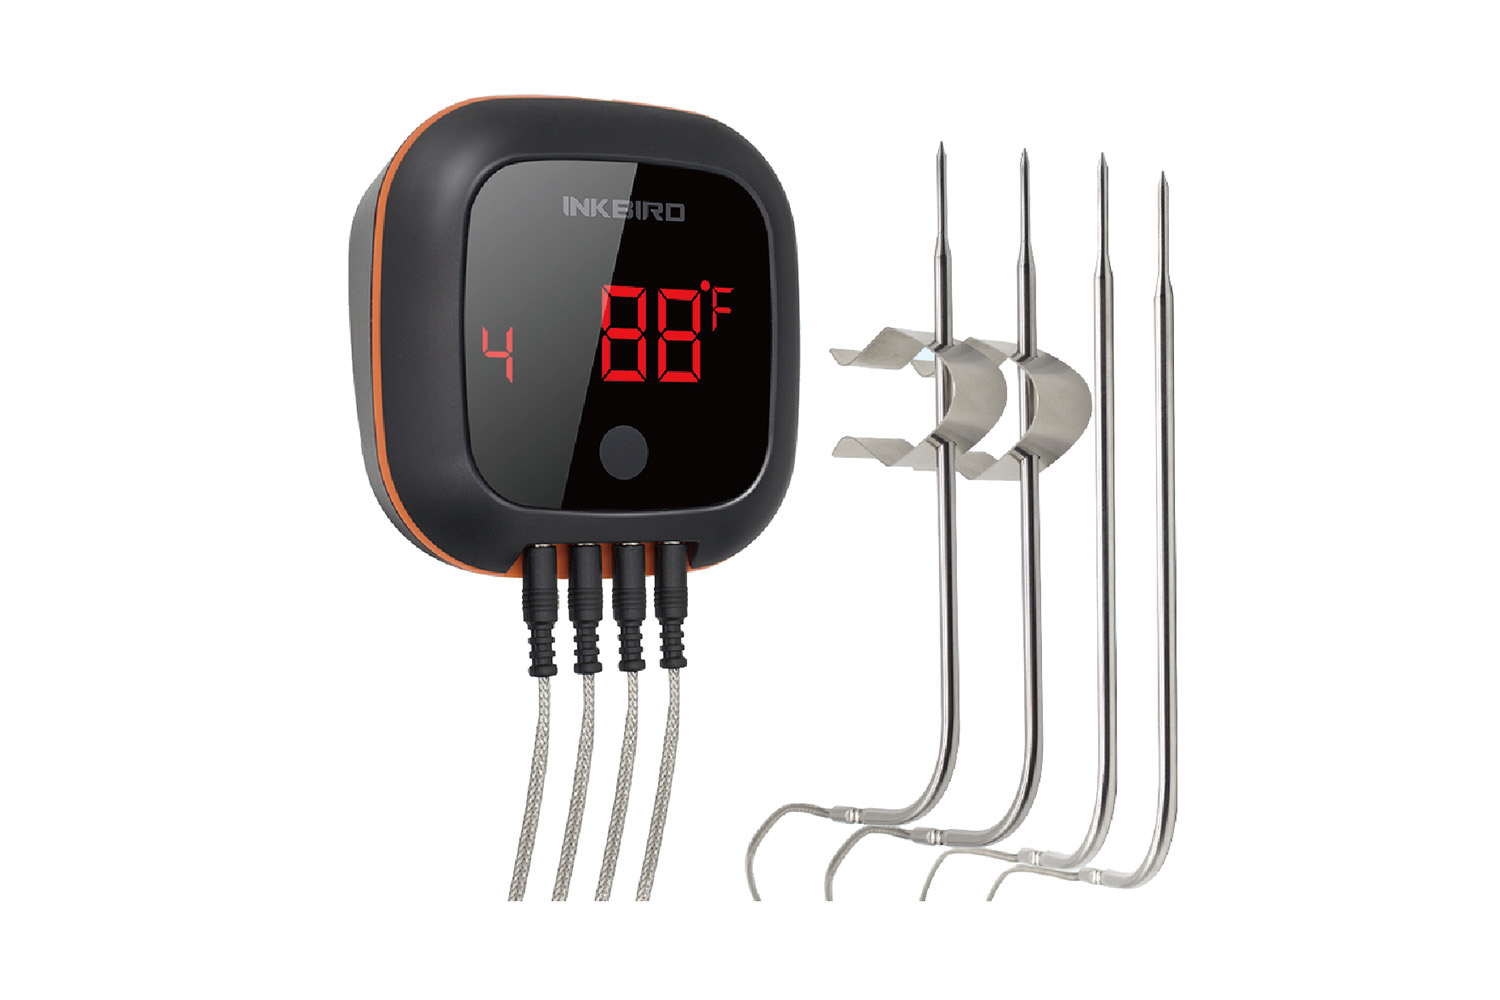 This is Why You Need to Use a Meat Thermometer — Eat This Not That